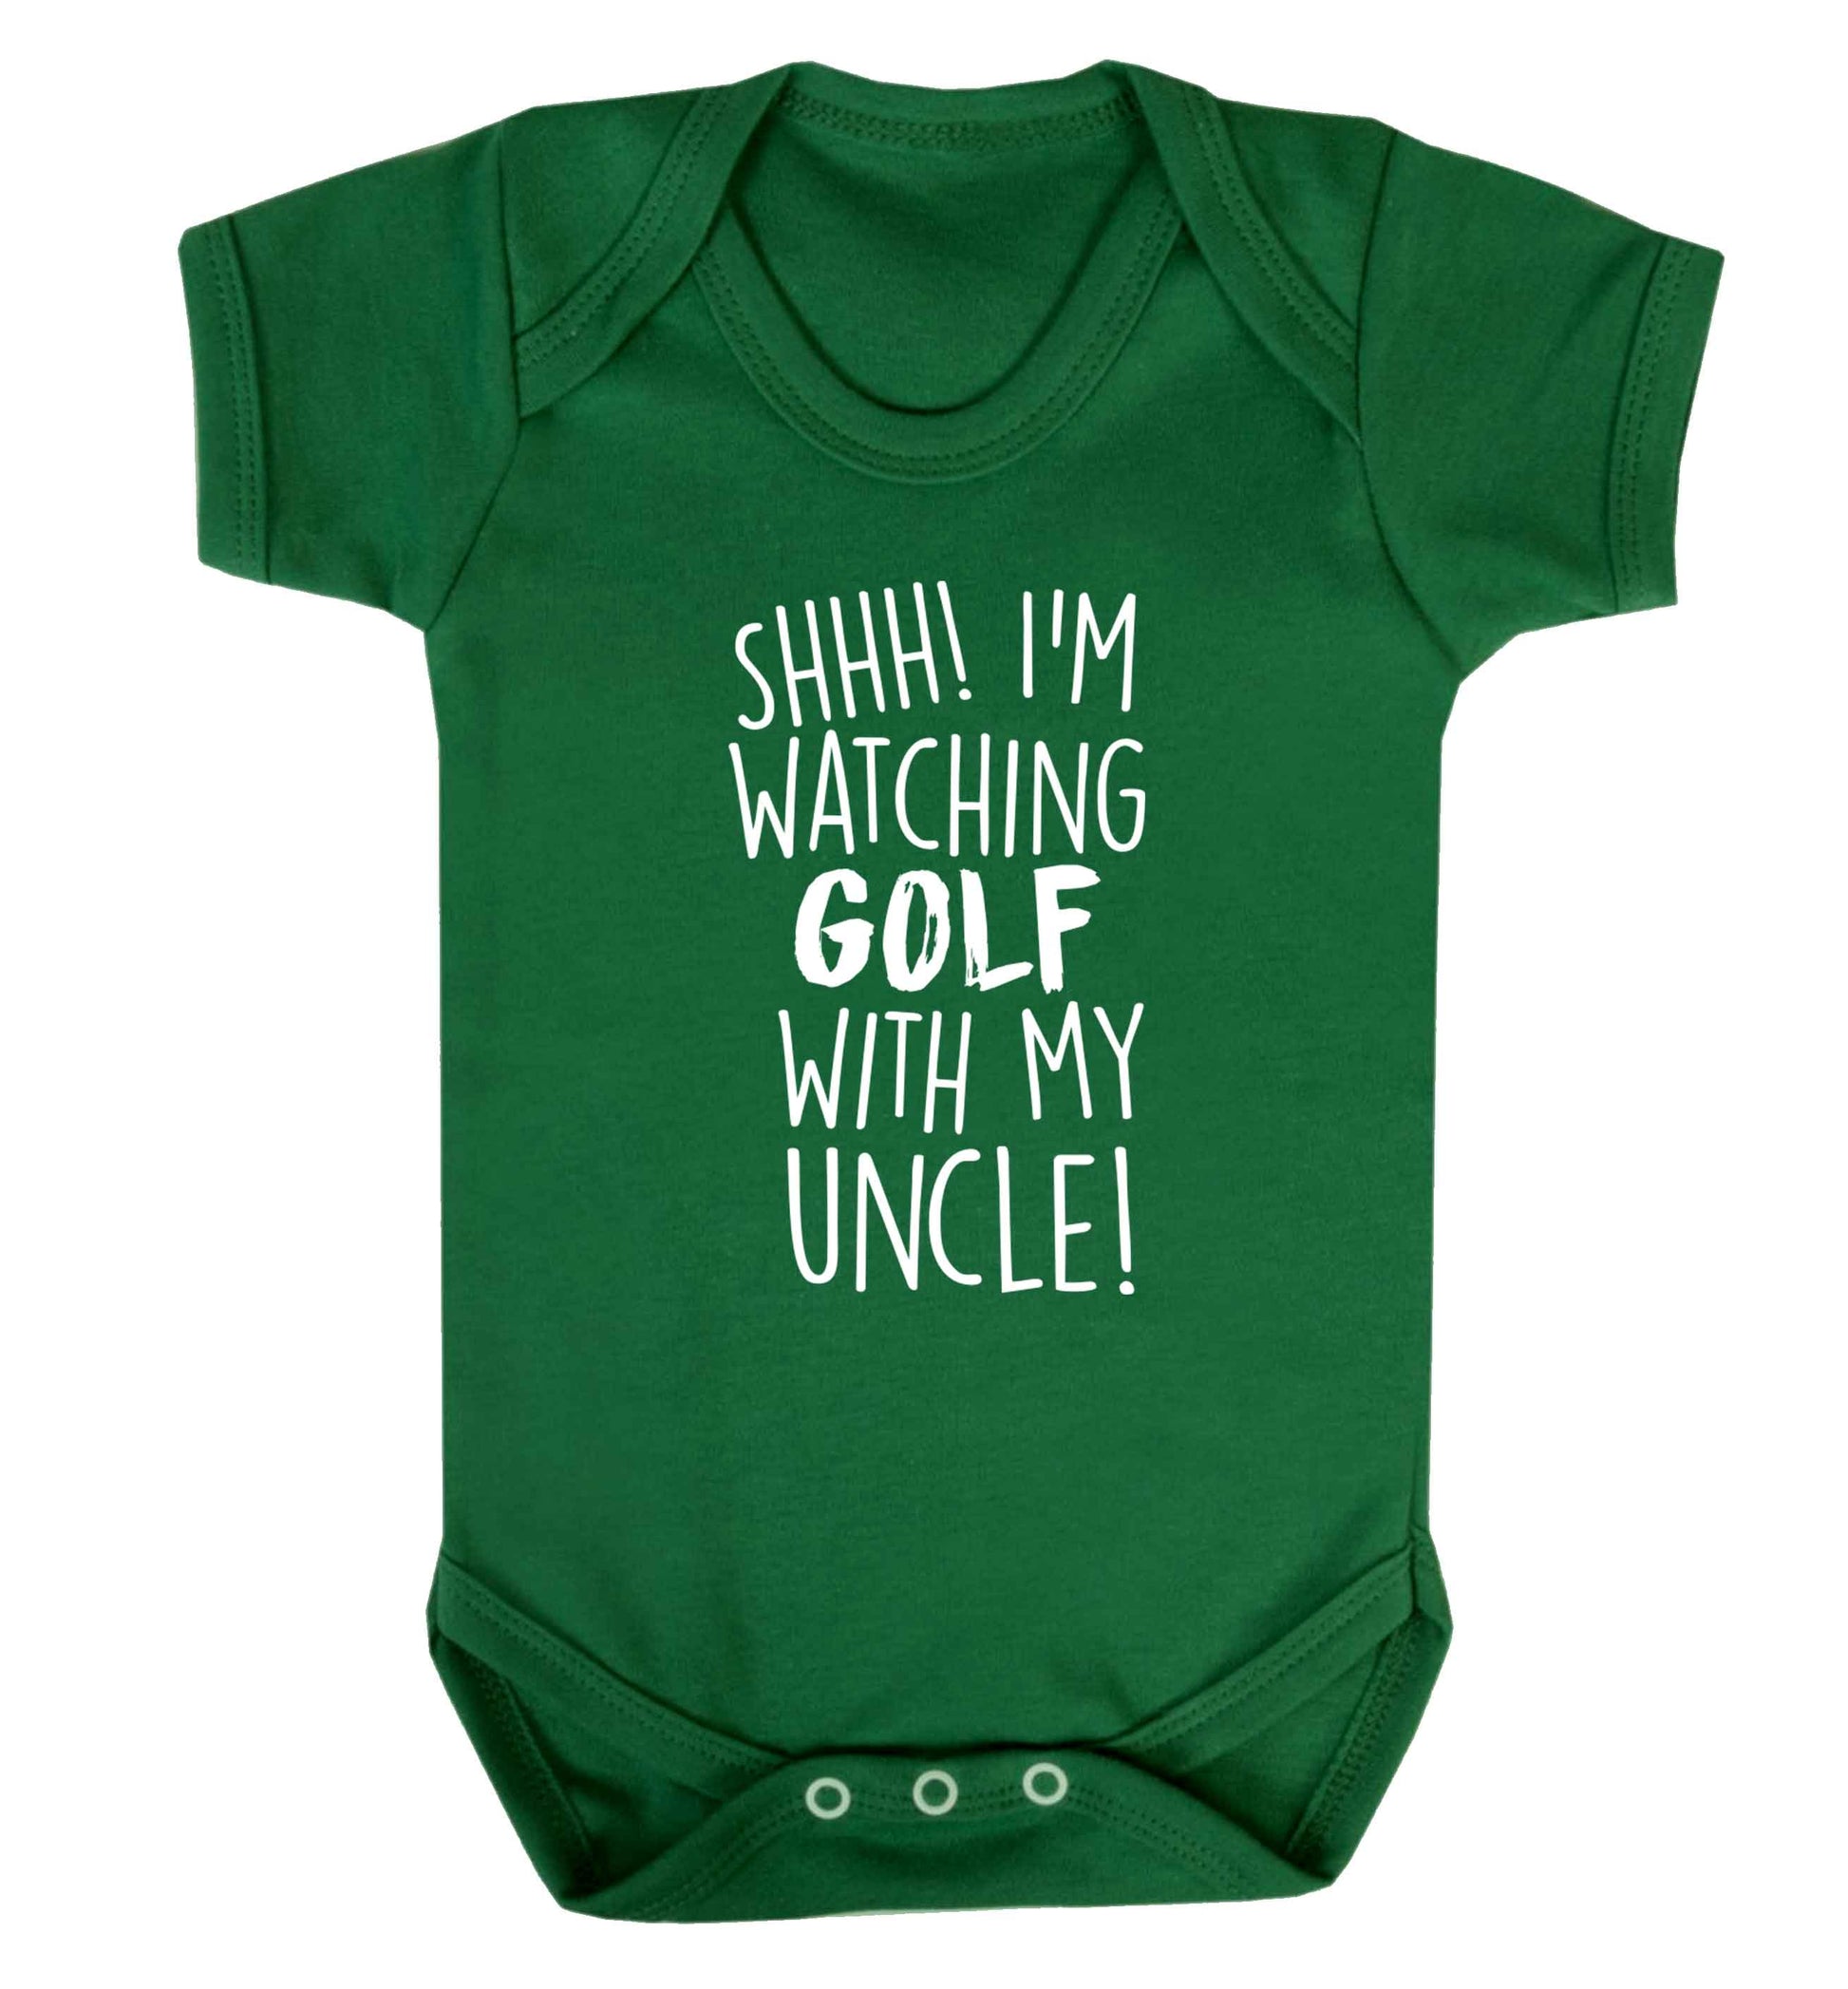 Shh I'm watching golf with my uncle Baby Vest green 18-24 months